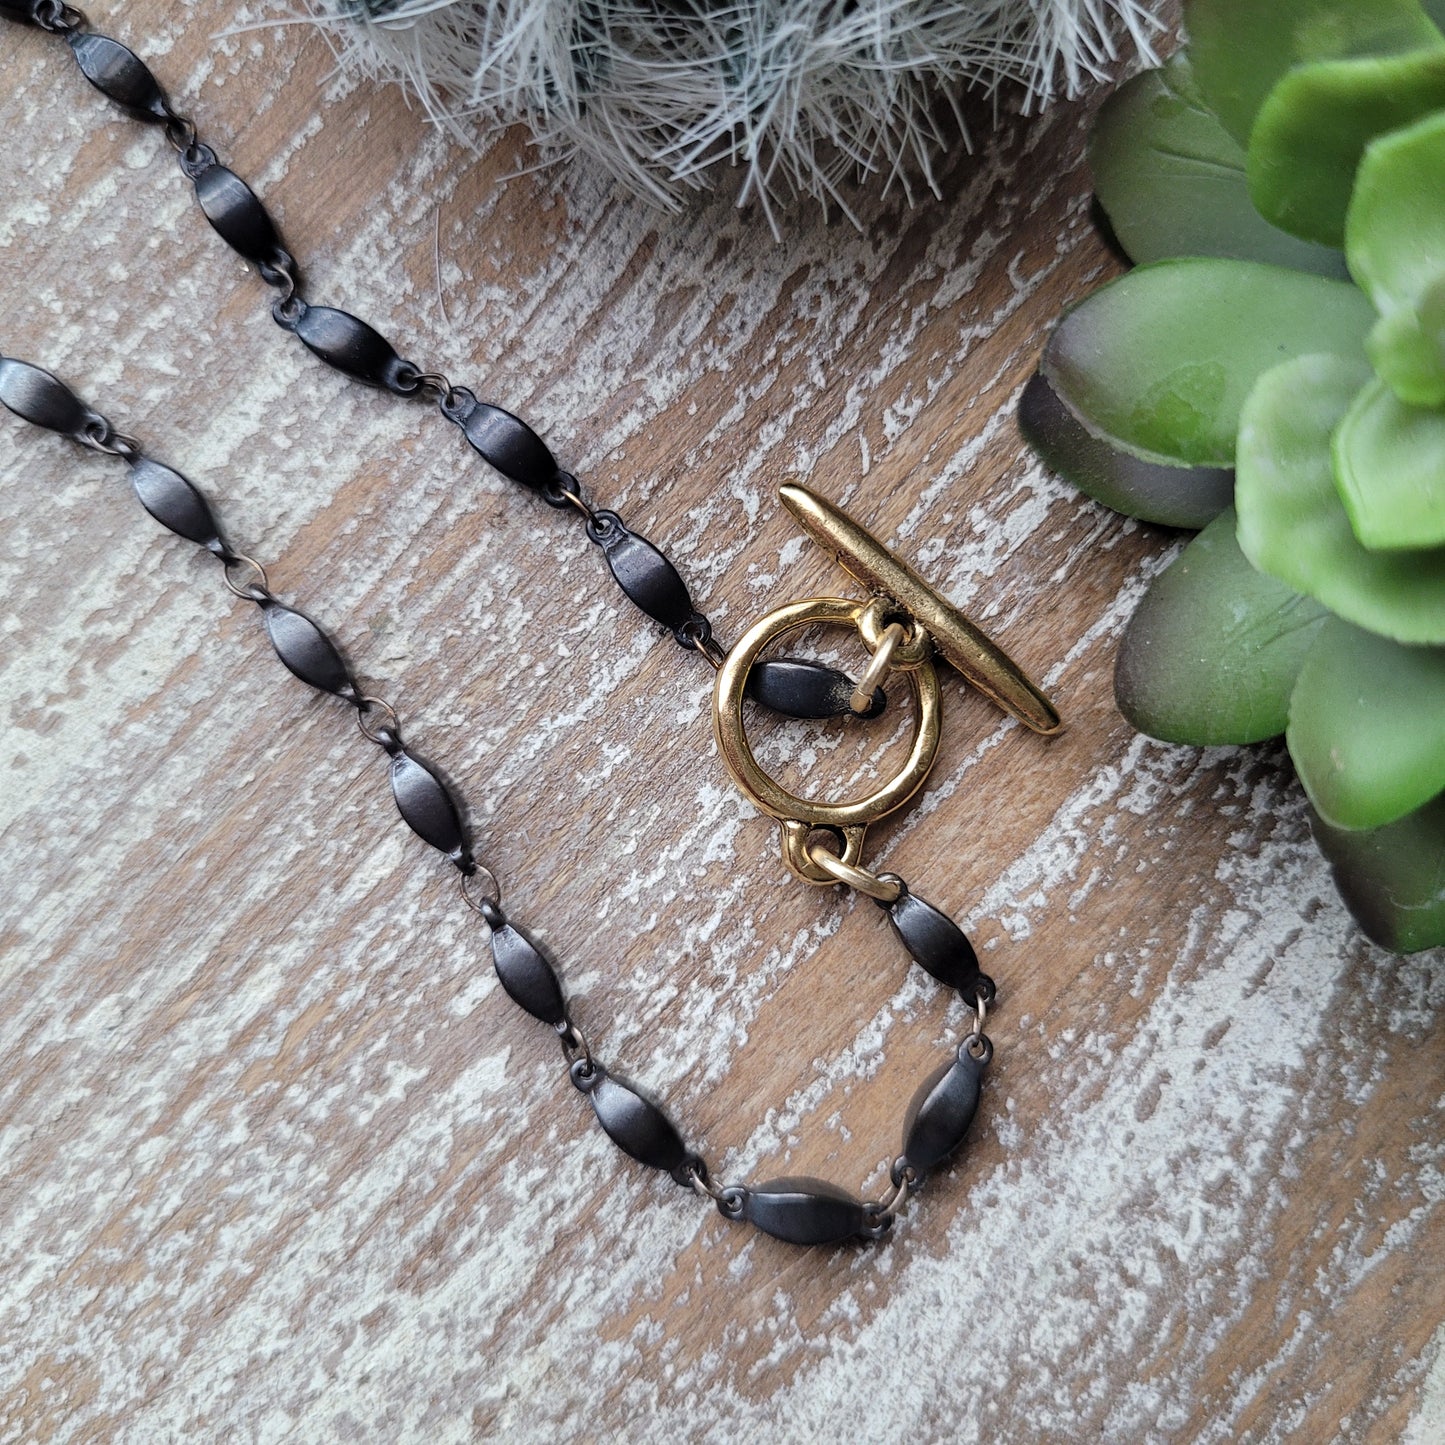 Rustic St Benedict necklace, boho Artisan crafted 18k gold plated pewter pendant, dark brass lantern chain